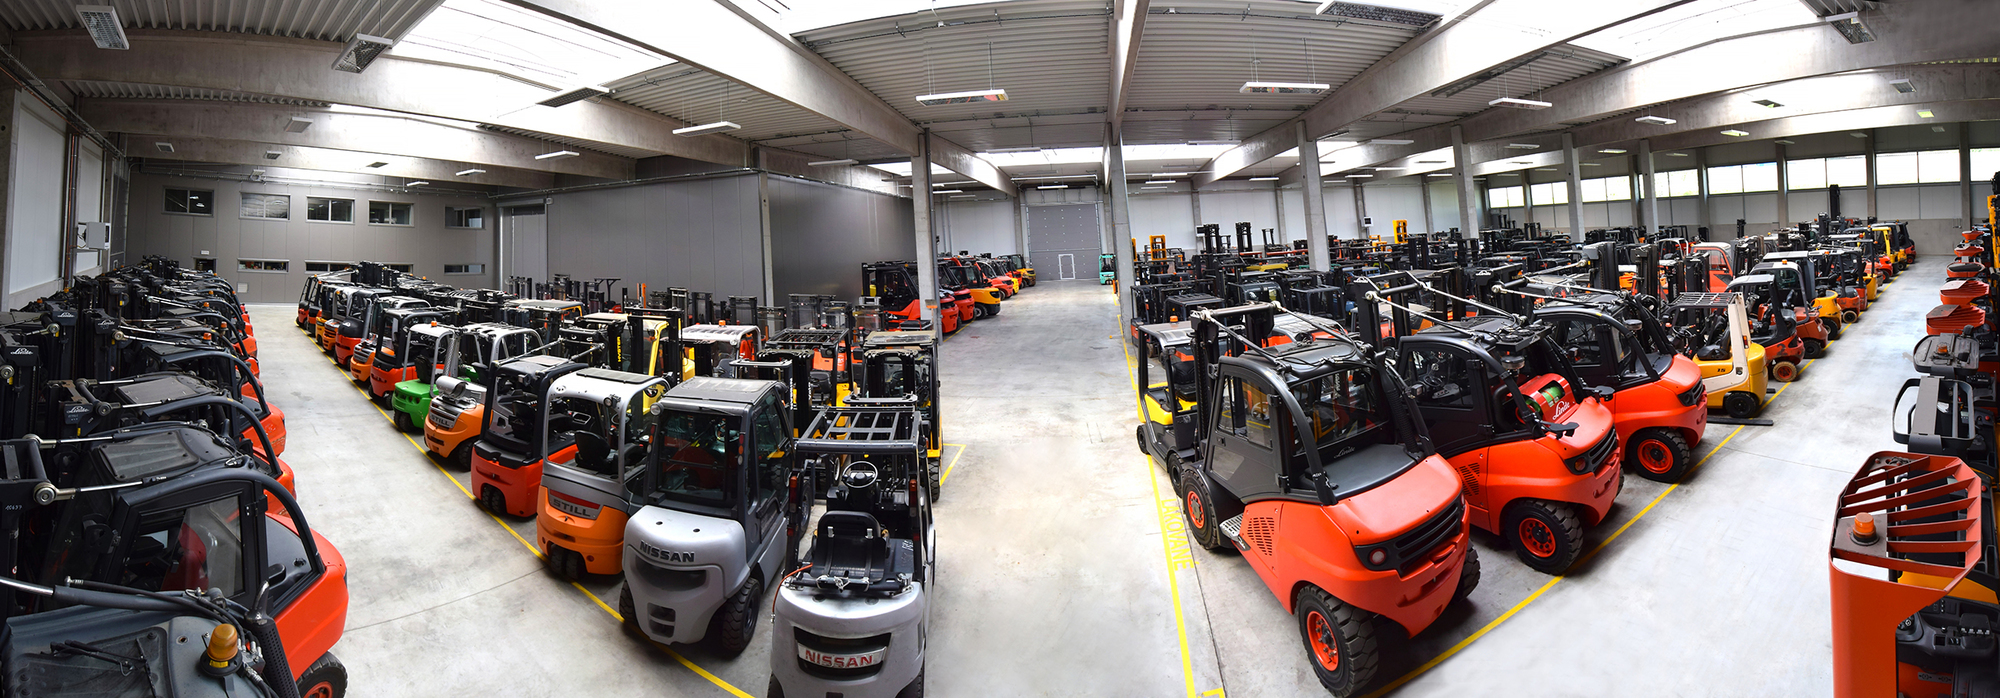 CHUF – cheap used forklifts - Matériels de manutention undefined: photos 1